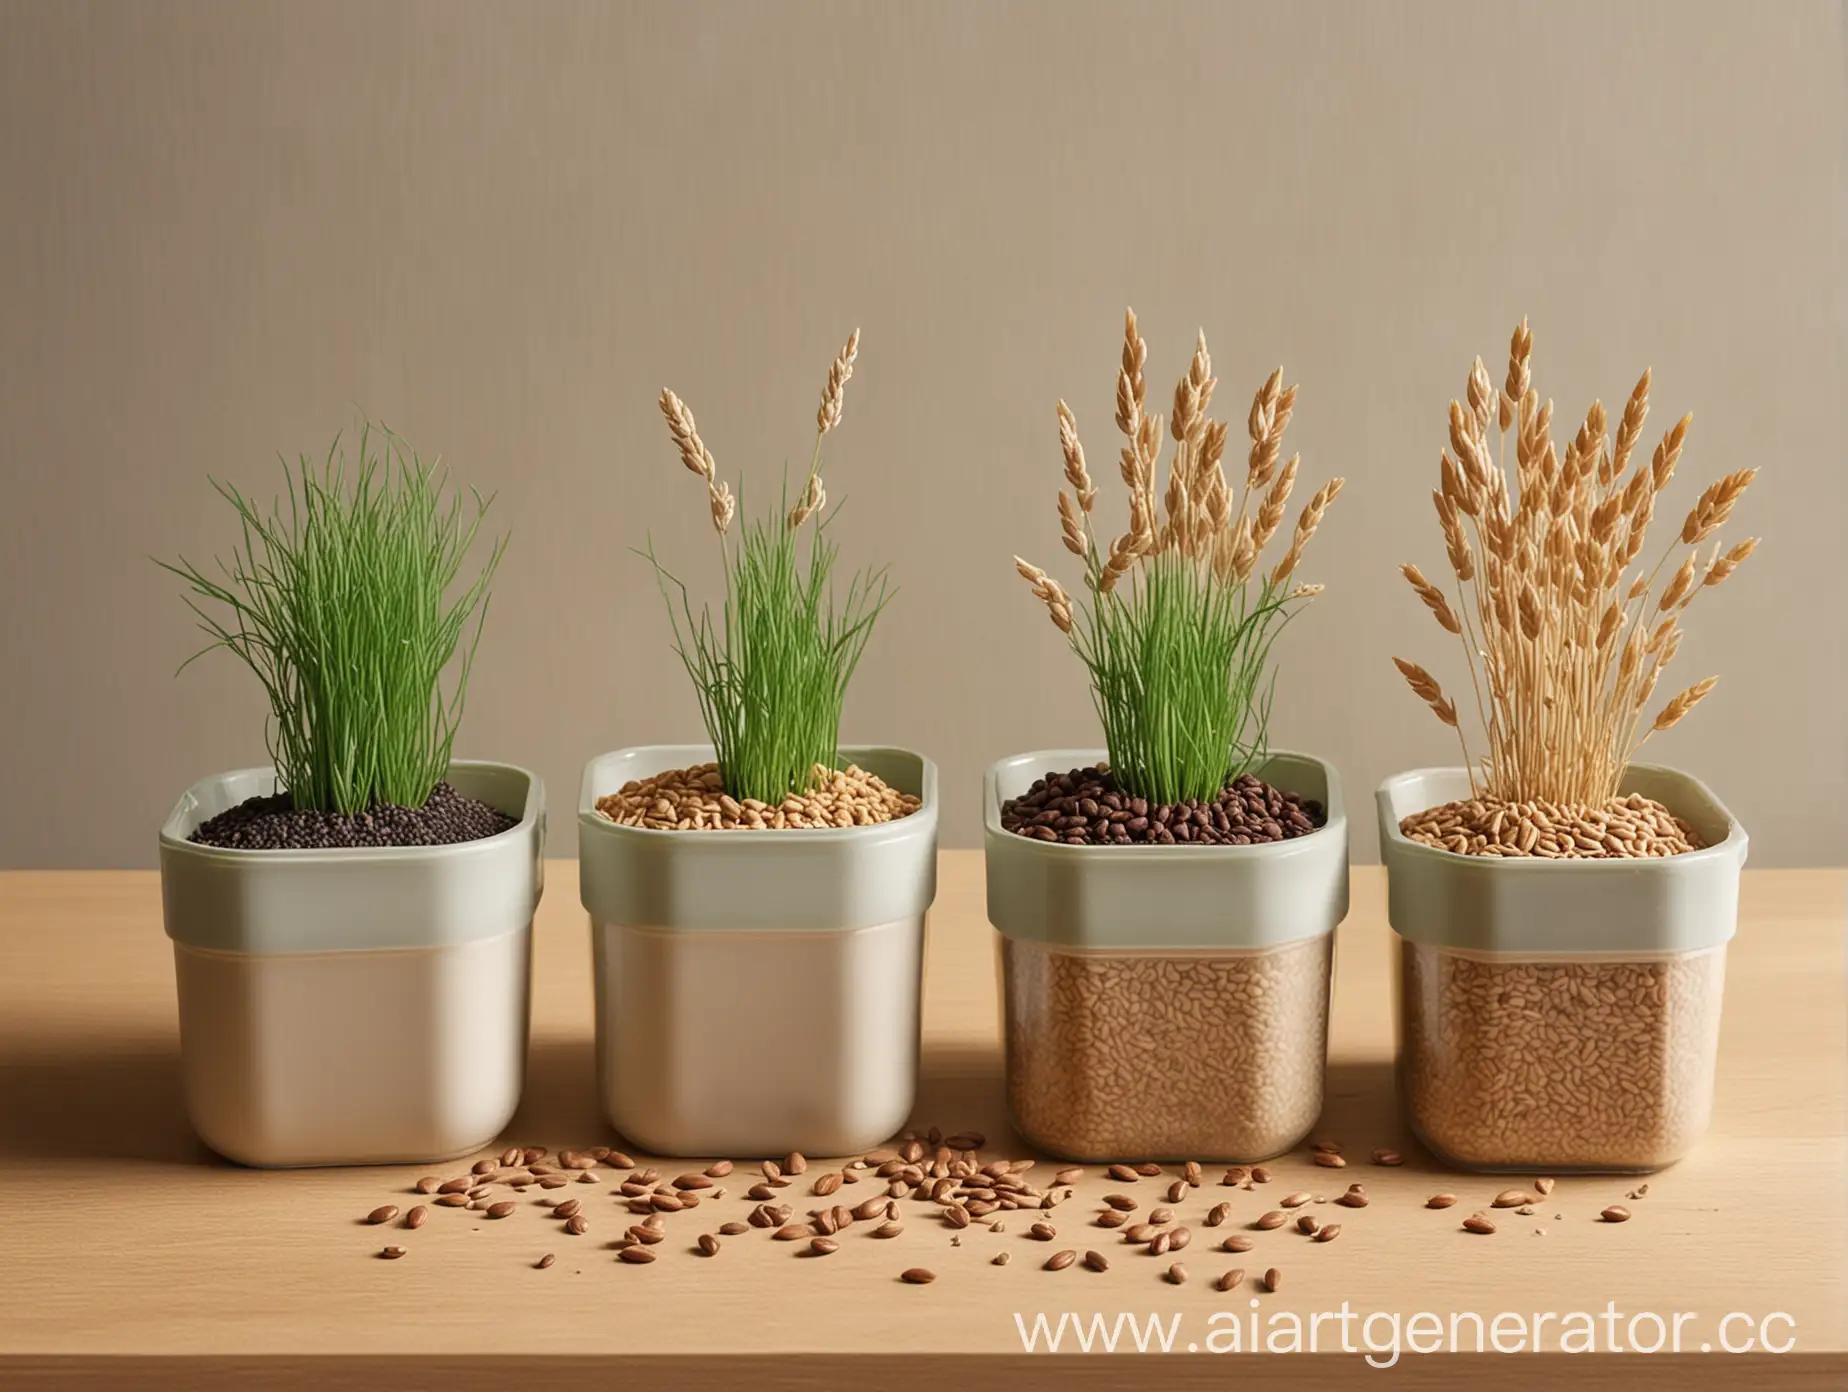 Realistic-Photo-of-Three-Planted-Oat-Seeds-in-Plastic-Kitchen-Containers